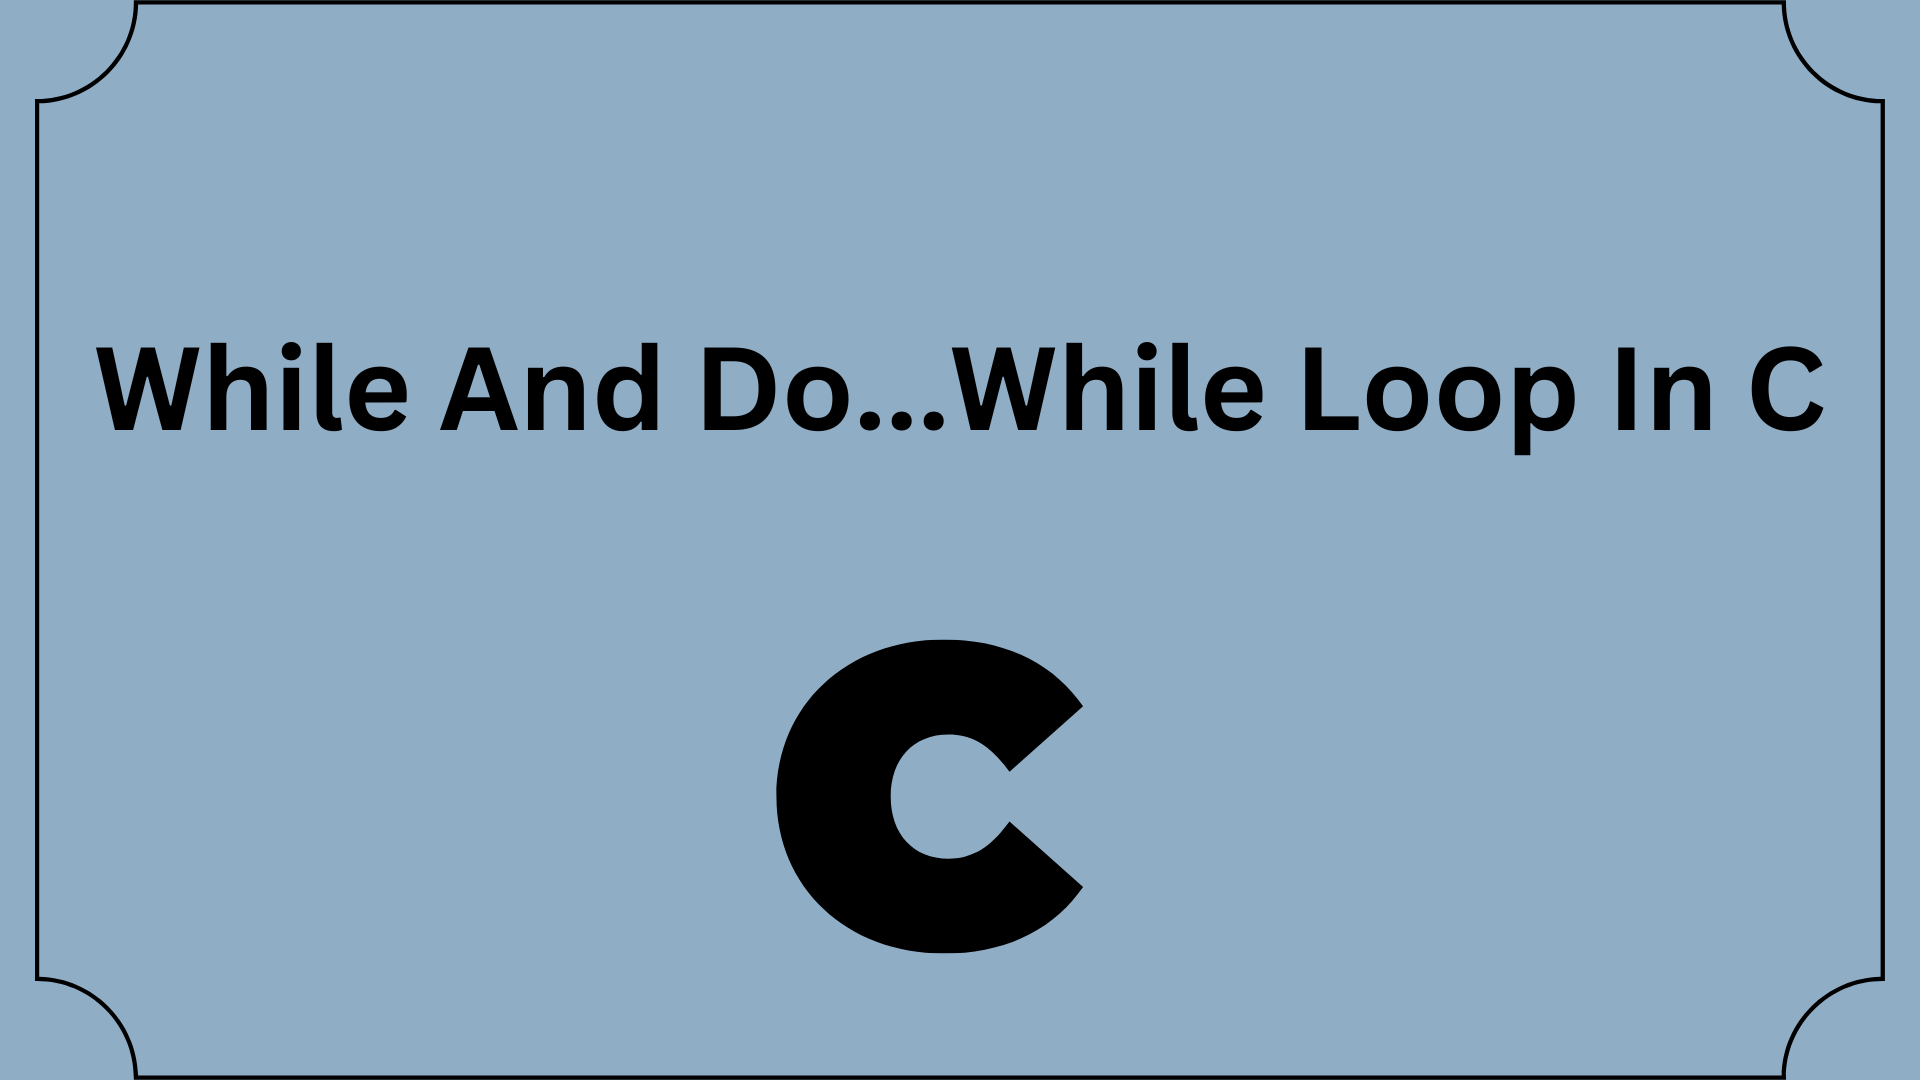 While And Do...While Loop In C